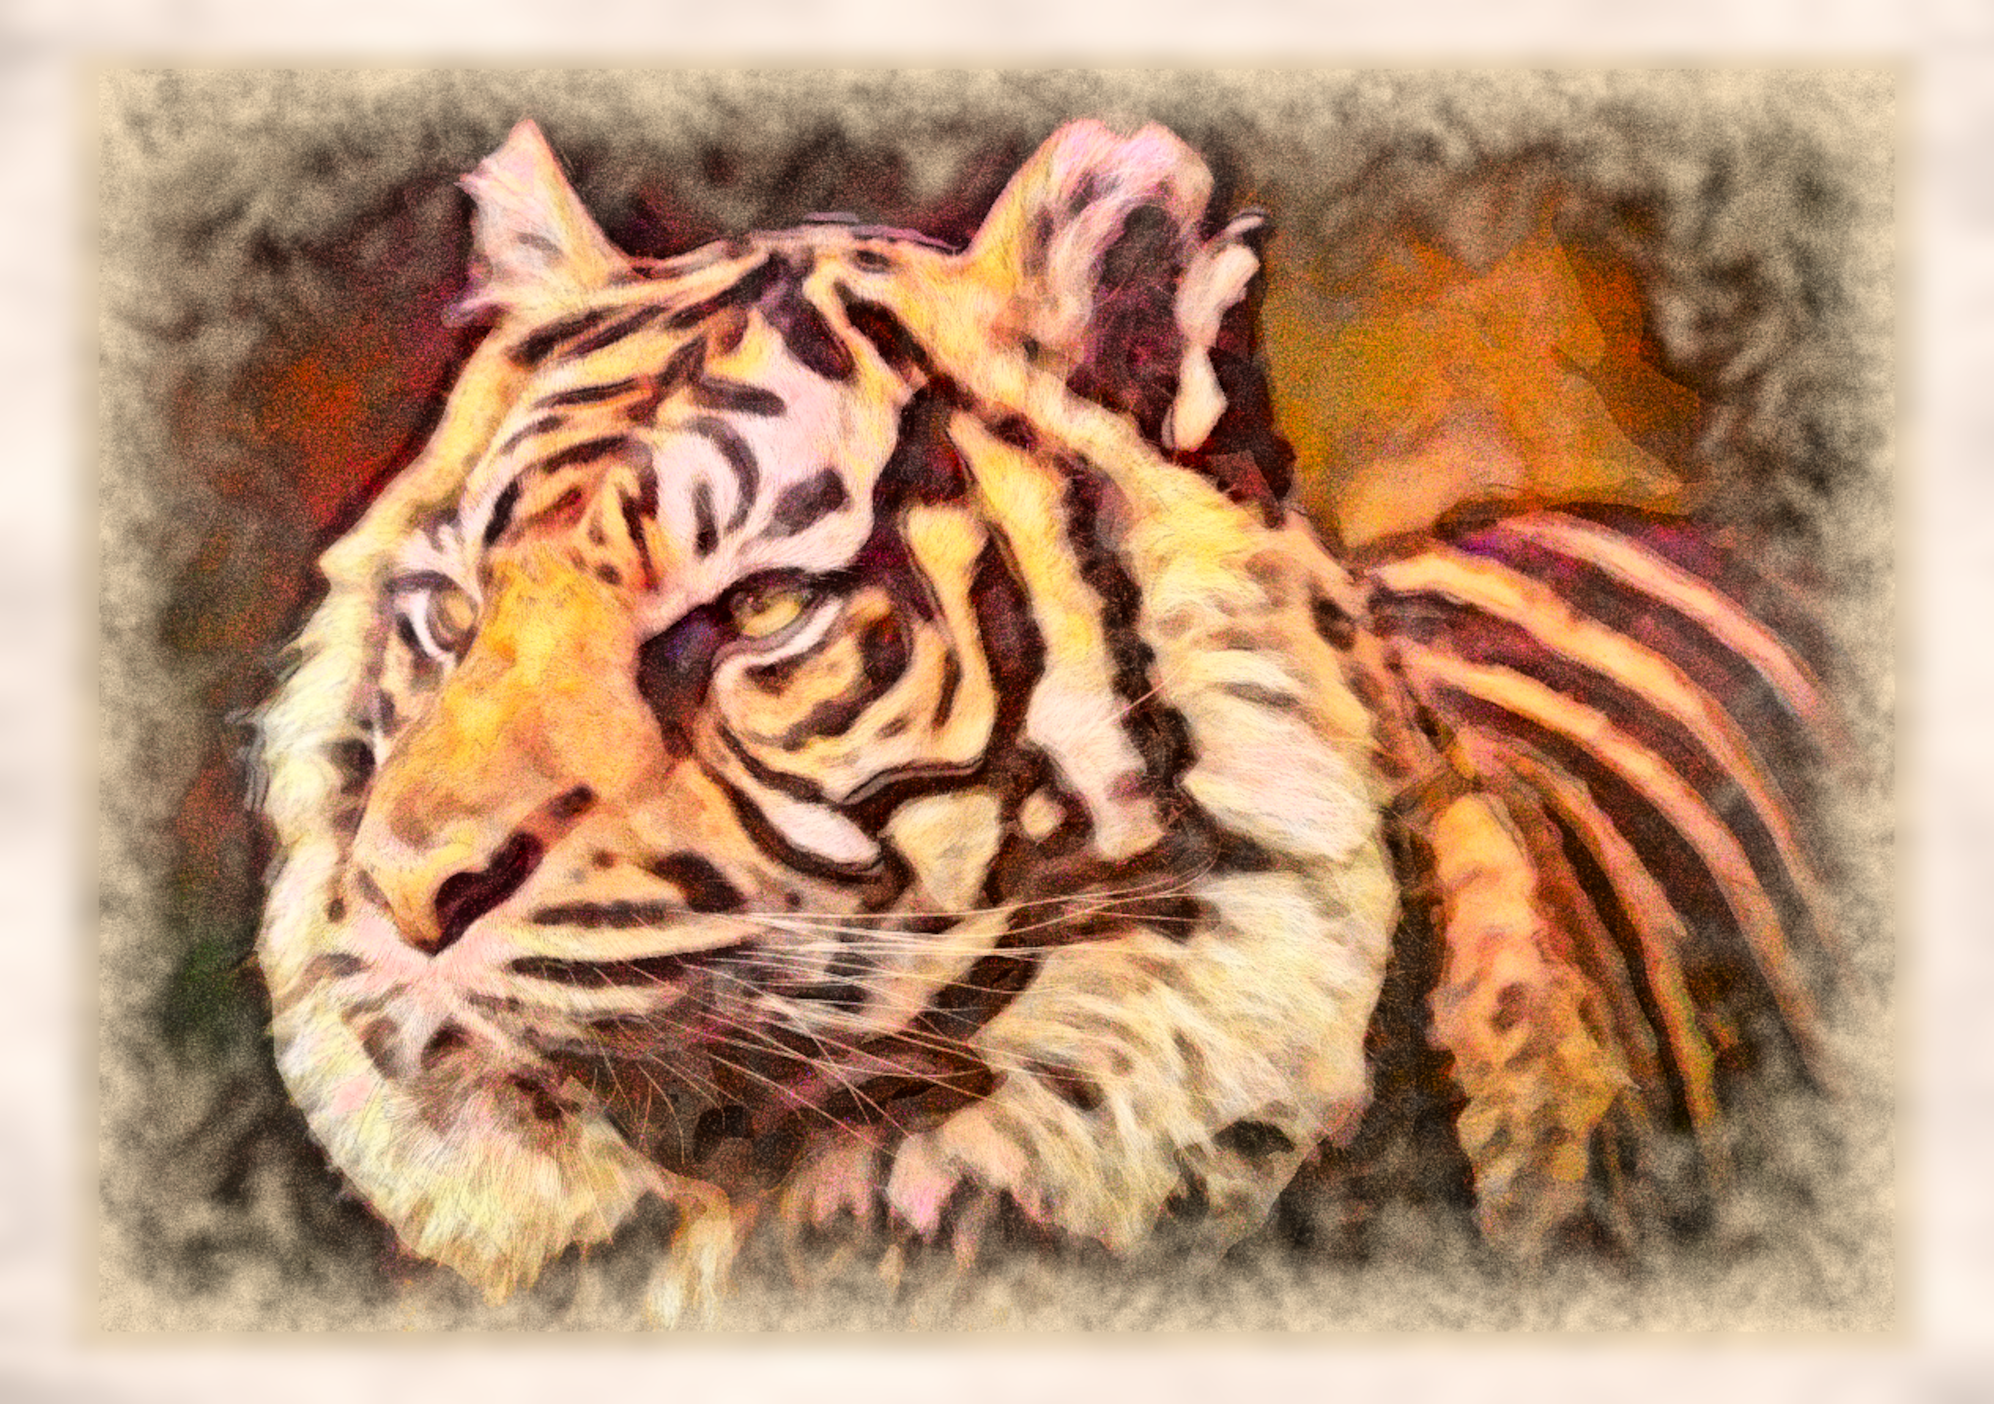 2023-09-29 15-35-11 tiger-8214815 with a Watercolor Pastels Effect 2023 (4.0,75.0,32.0,50.0,20.0,8.0,75.0,False,0).png